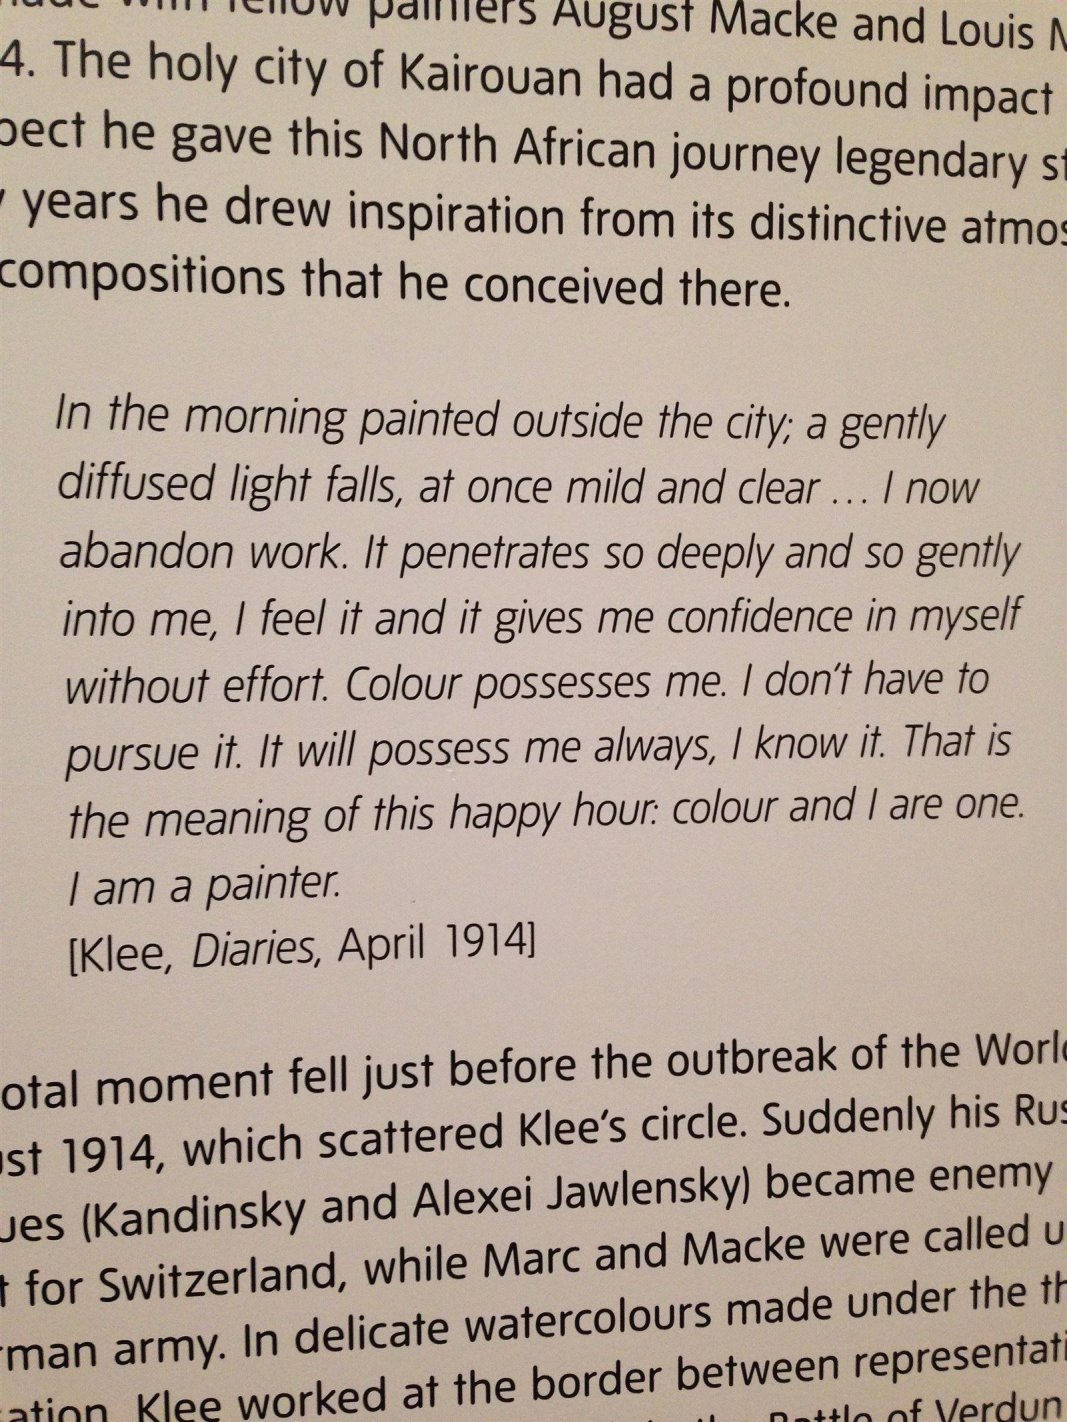 There was a special exhibit within the museum showing an artist I admire,  Paul Klee.  I really identified with this excerpt from his diary about his feeling regarding color and and how it "possesses" him. 